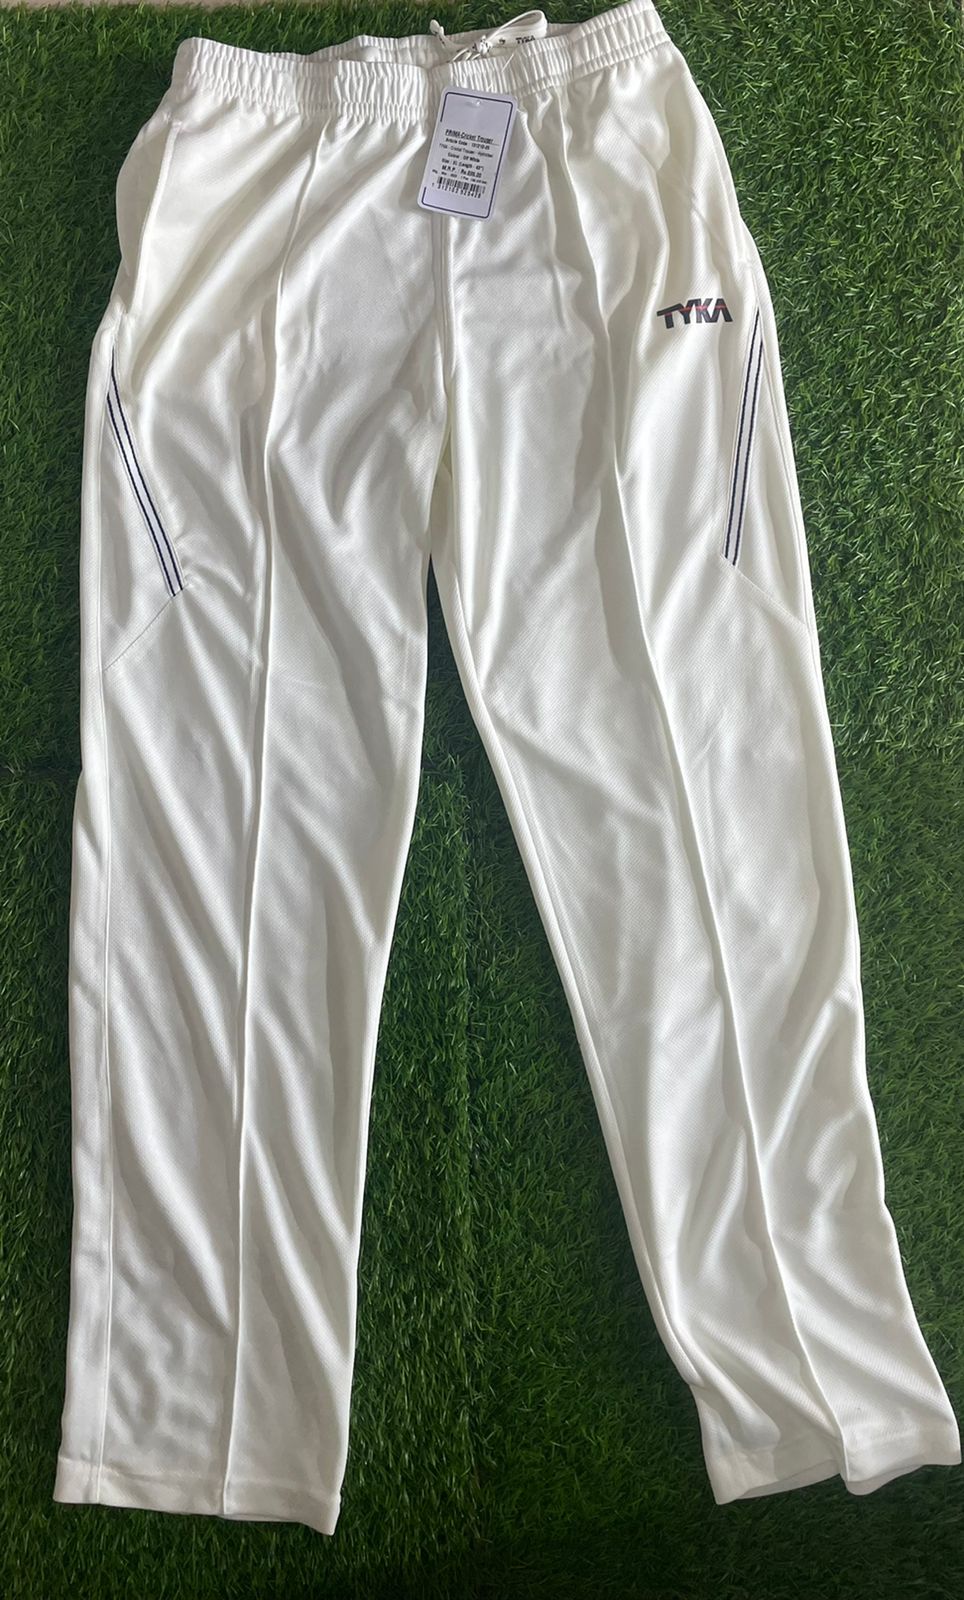 Decathlon Sports India - Atria - Clearance sale on Cricket Track pants !!!!  All at 449 only at Decathlon Atria #sale #cricket #flx #decathlonatria |  Facebook